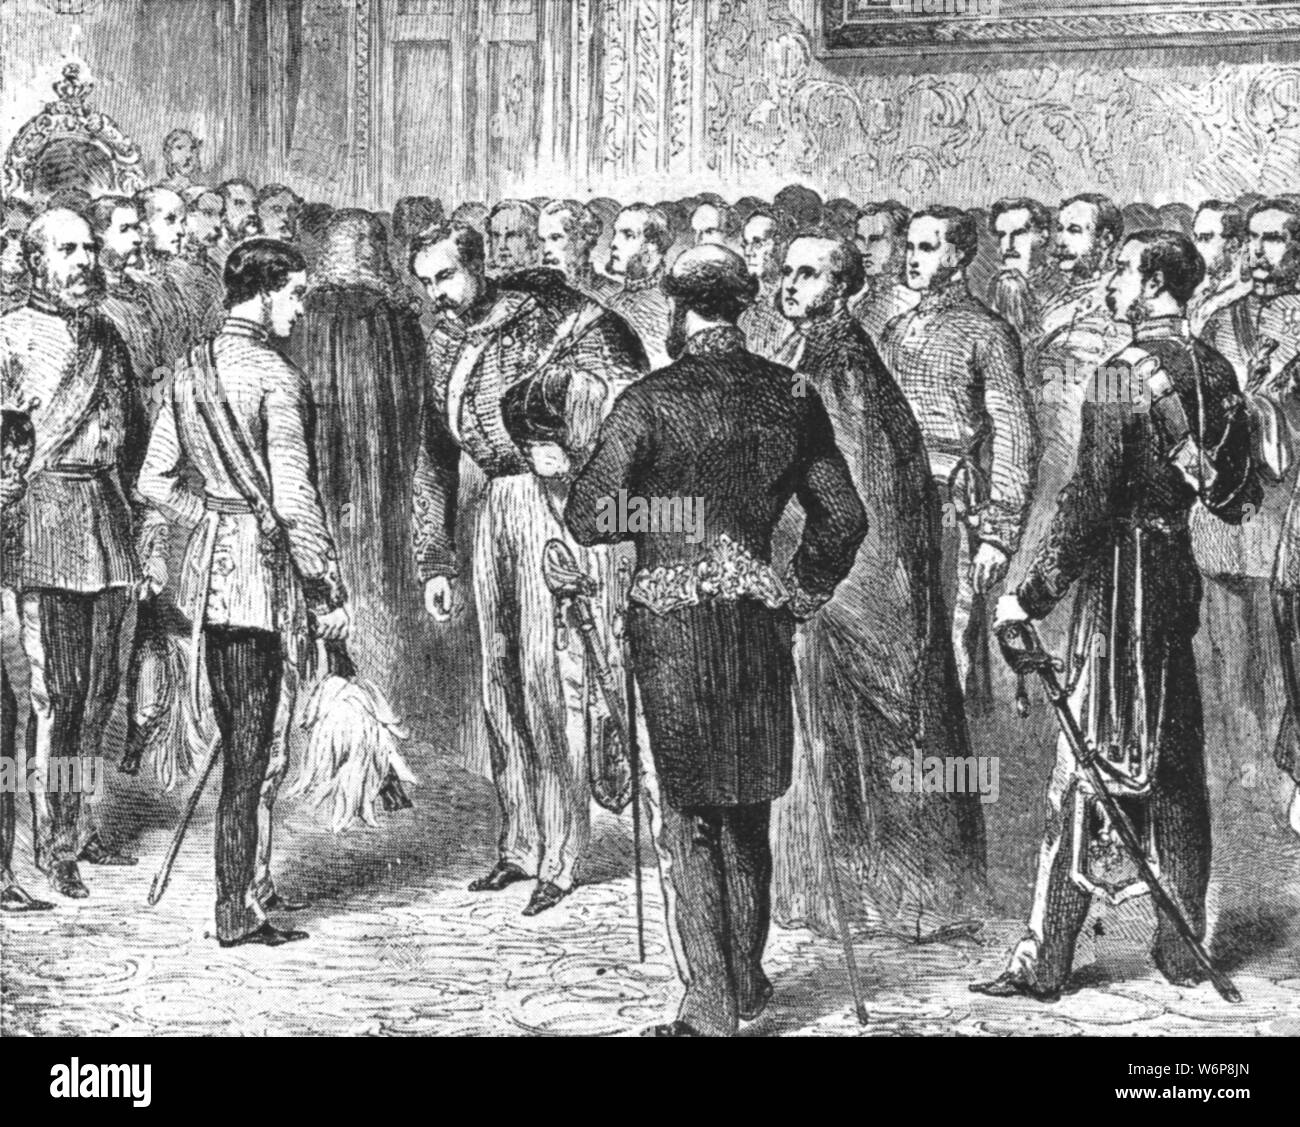 'The Prince of Wales Holding his First Levee, February 18, 1863', (1901). Prince Albert Edward (1841-1910, the future King Edward VII, second left), meets officials, diplomats, and military officers at St James's Palace in London. Court lev&#xe9;es were formal receptions held by the British monarchy until 1939. Guests in full dress uniform or court dress were presented individually, and bowed to the monarch, with officials of the Royal Household and senior officers in attendance. From &quot;The Illustrated London News Record of the Glorious Reign of Queen Victoria 1837-1901: The Life and Acces Stock Photo